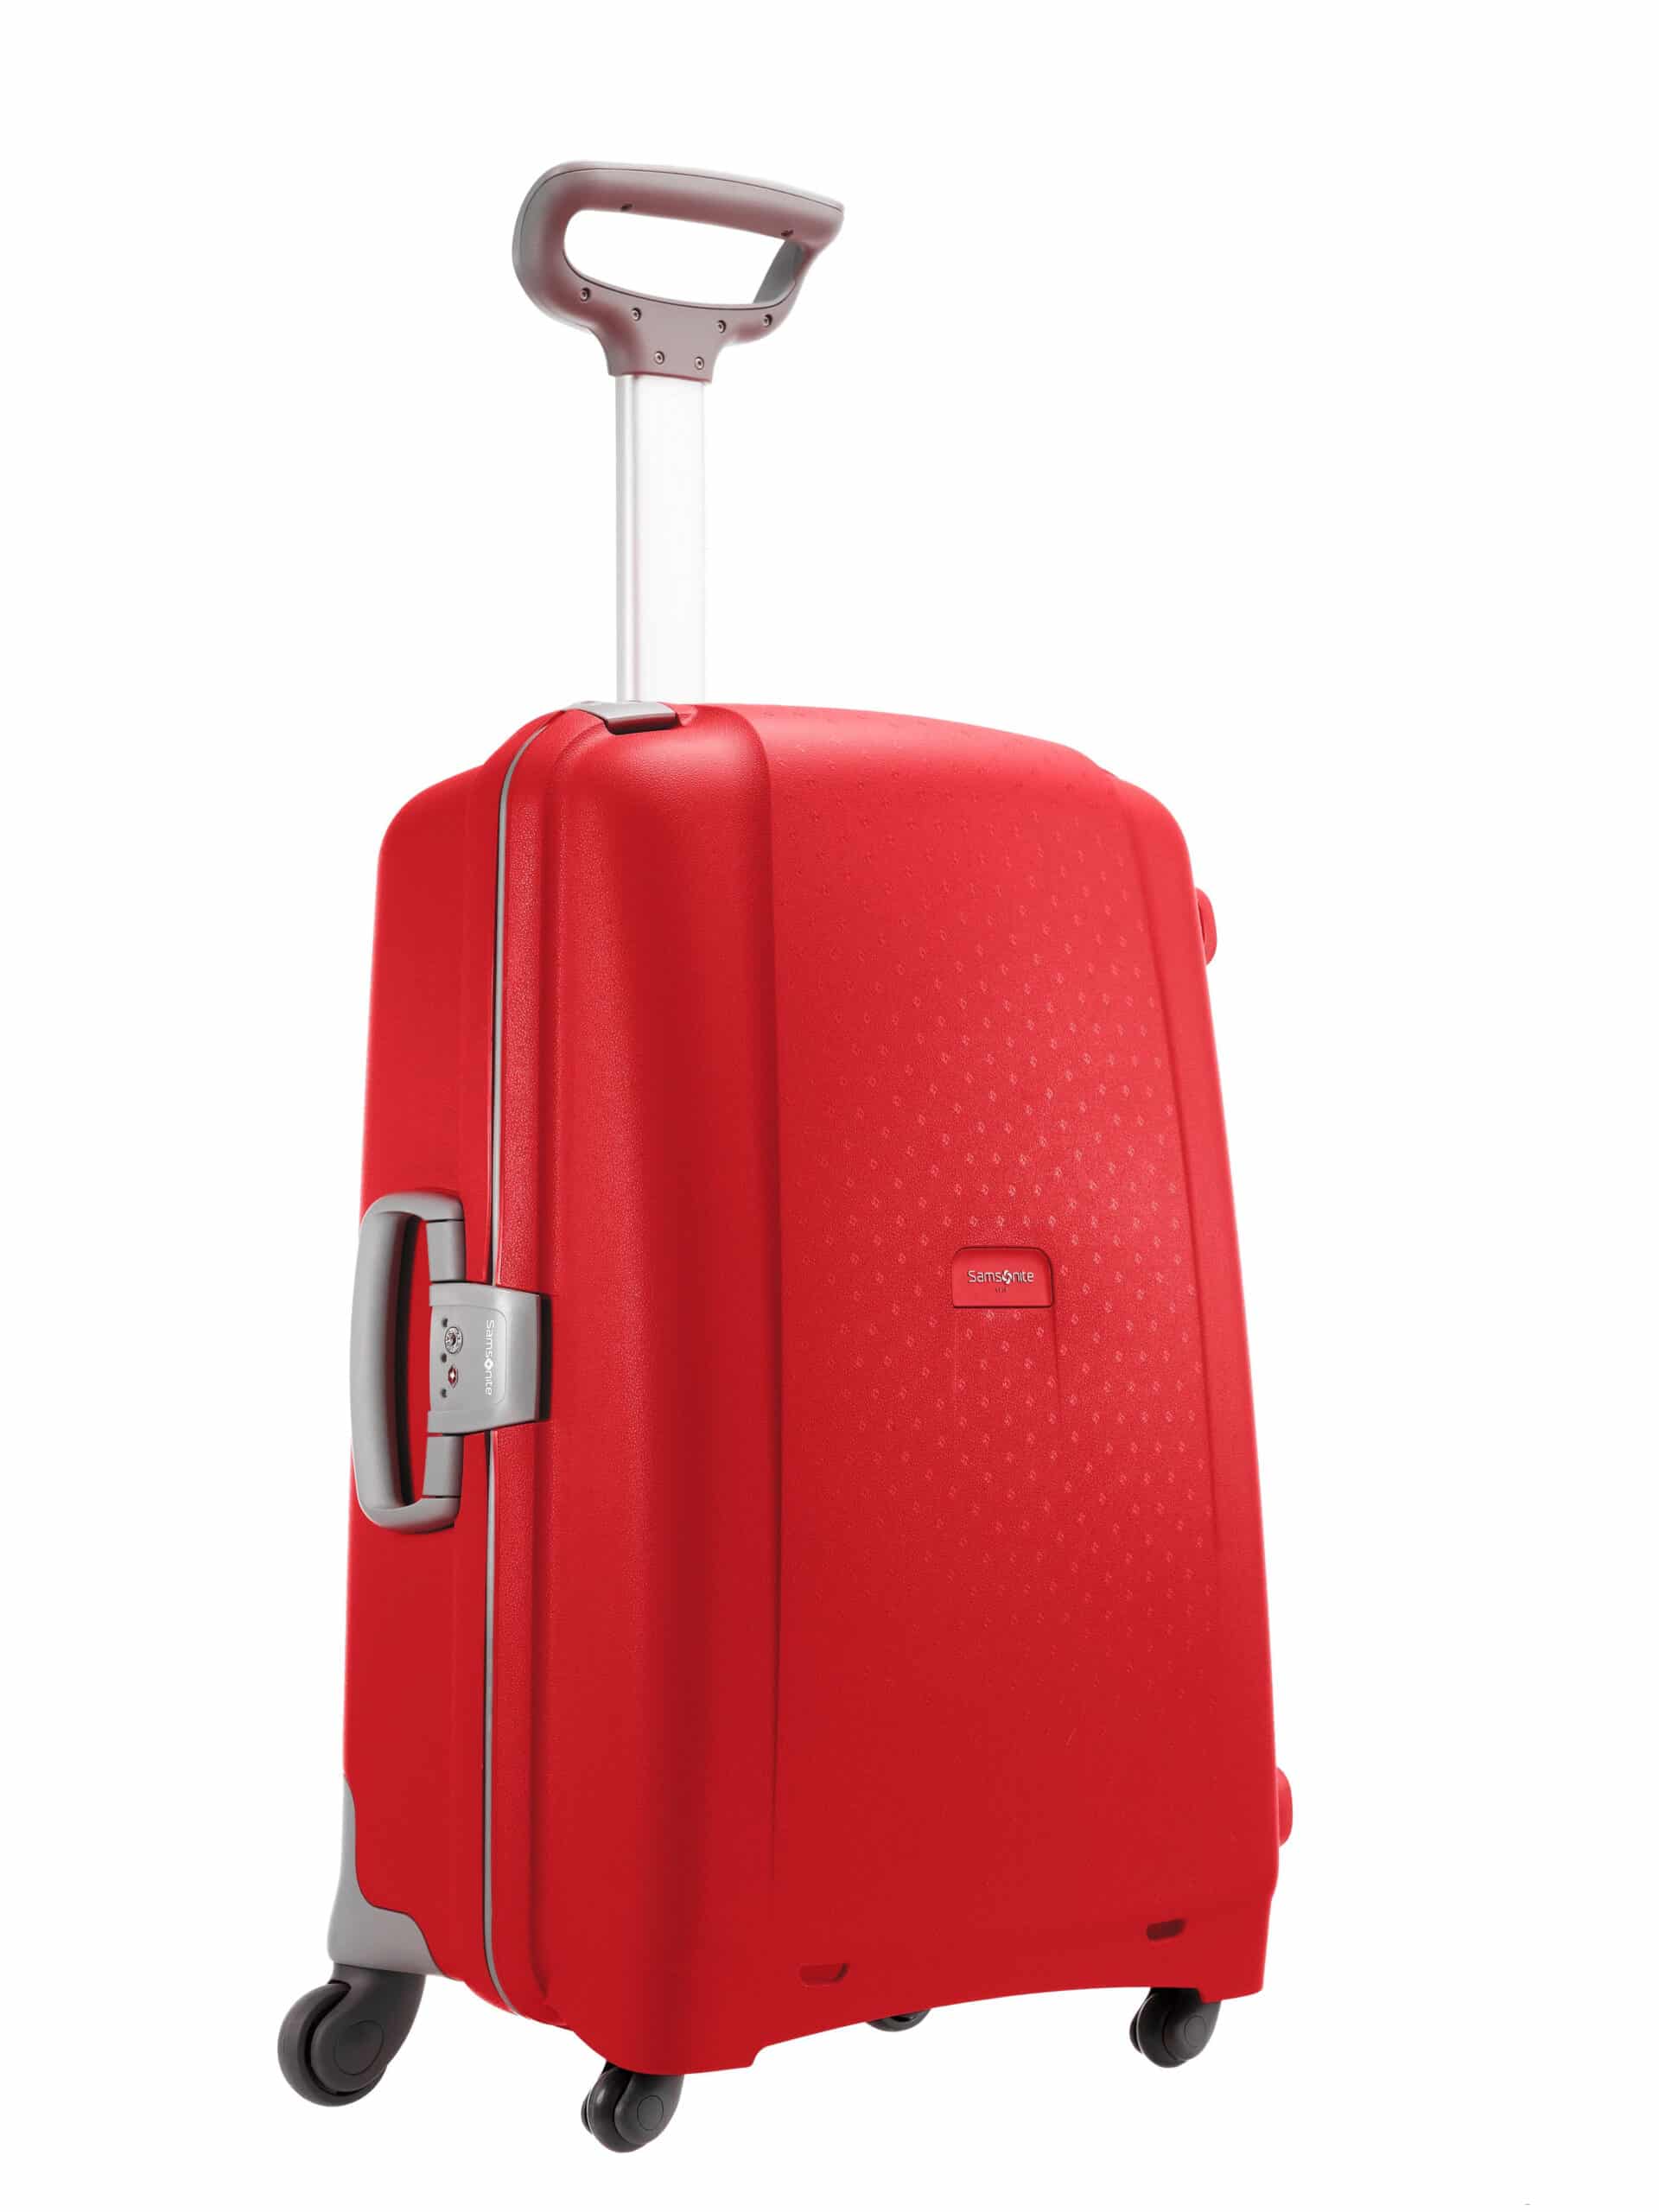 What Samsonite Suitcases Can be Carried On Flights?